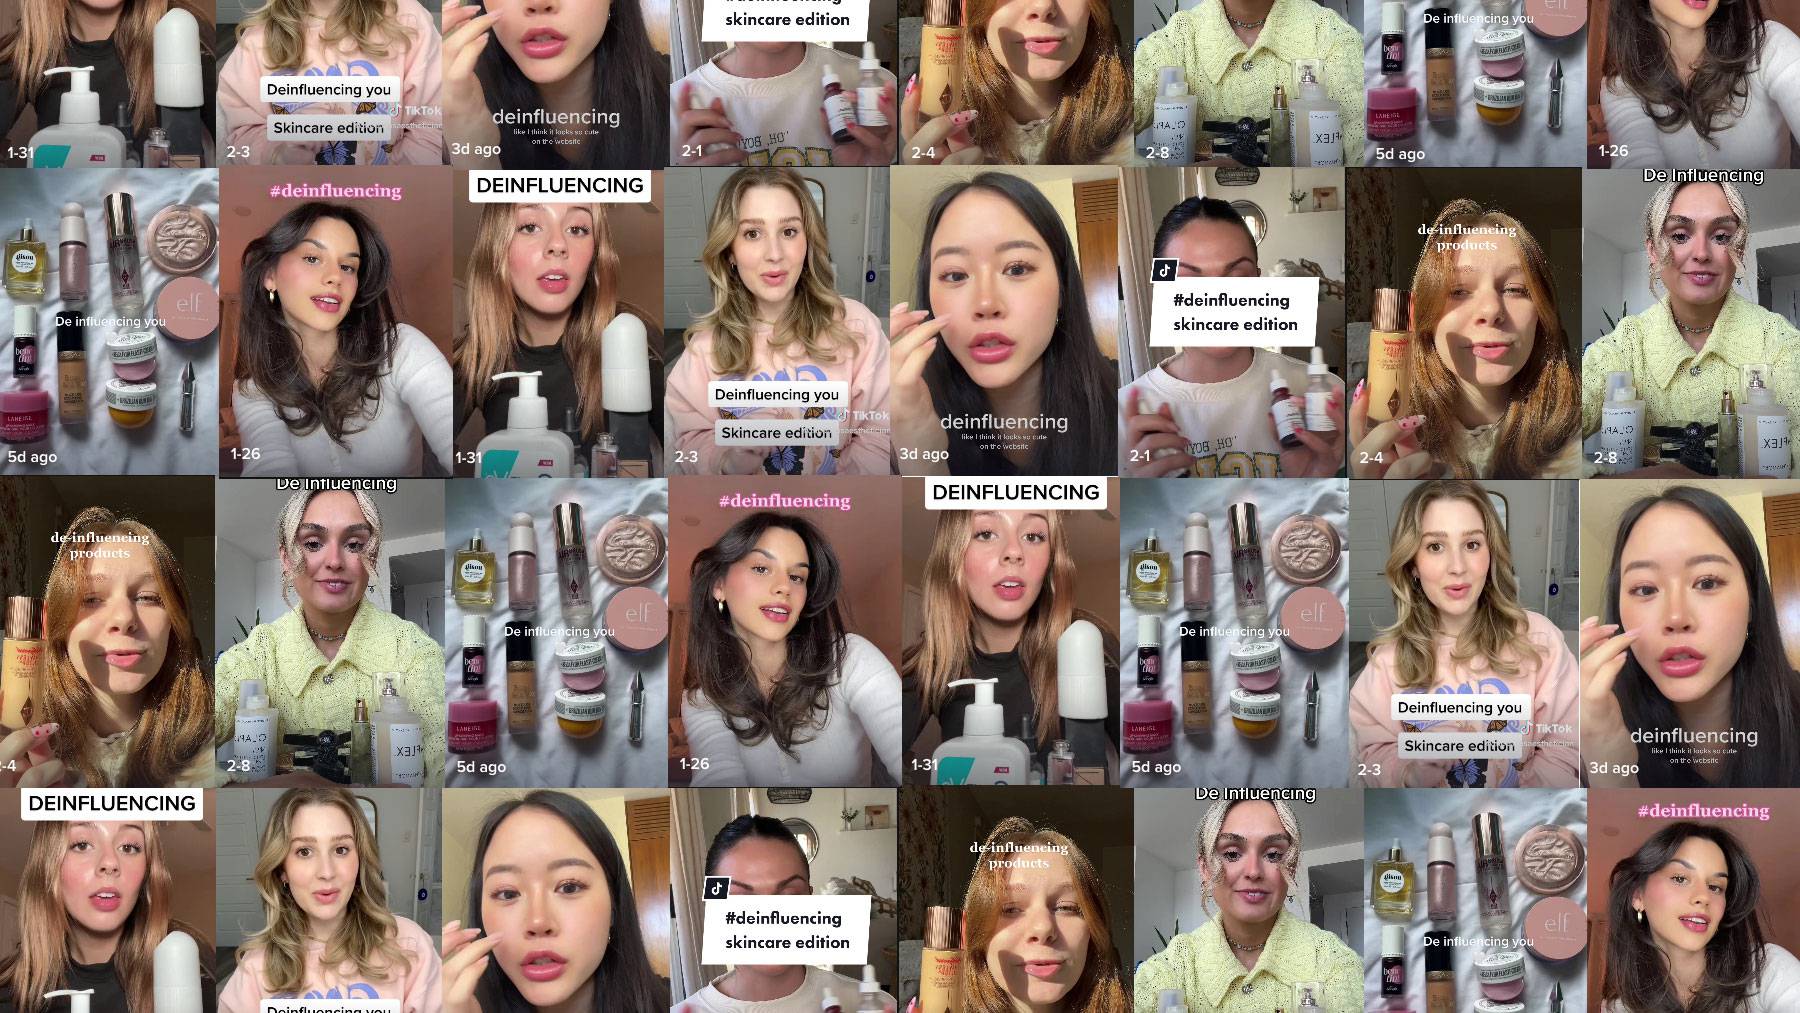 Deinfluencing is the latest craze to take over TikTok feeds.